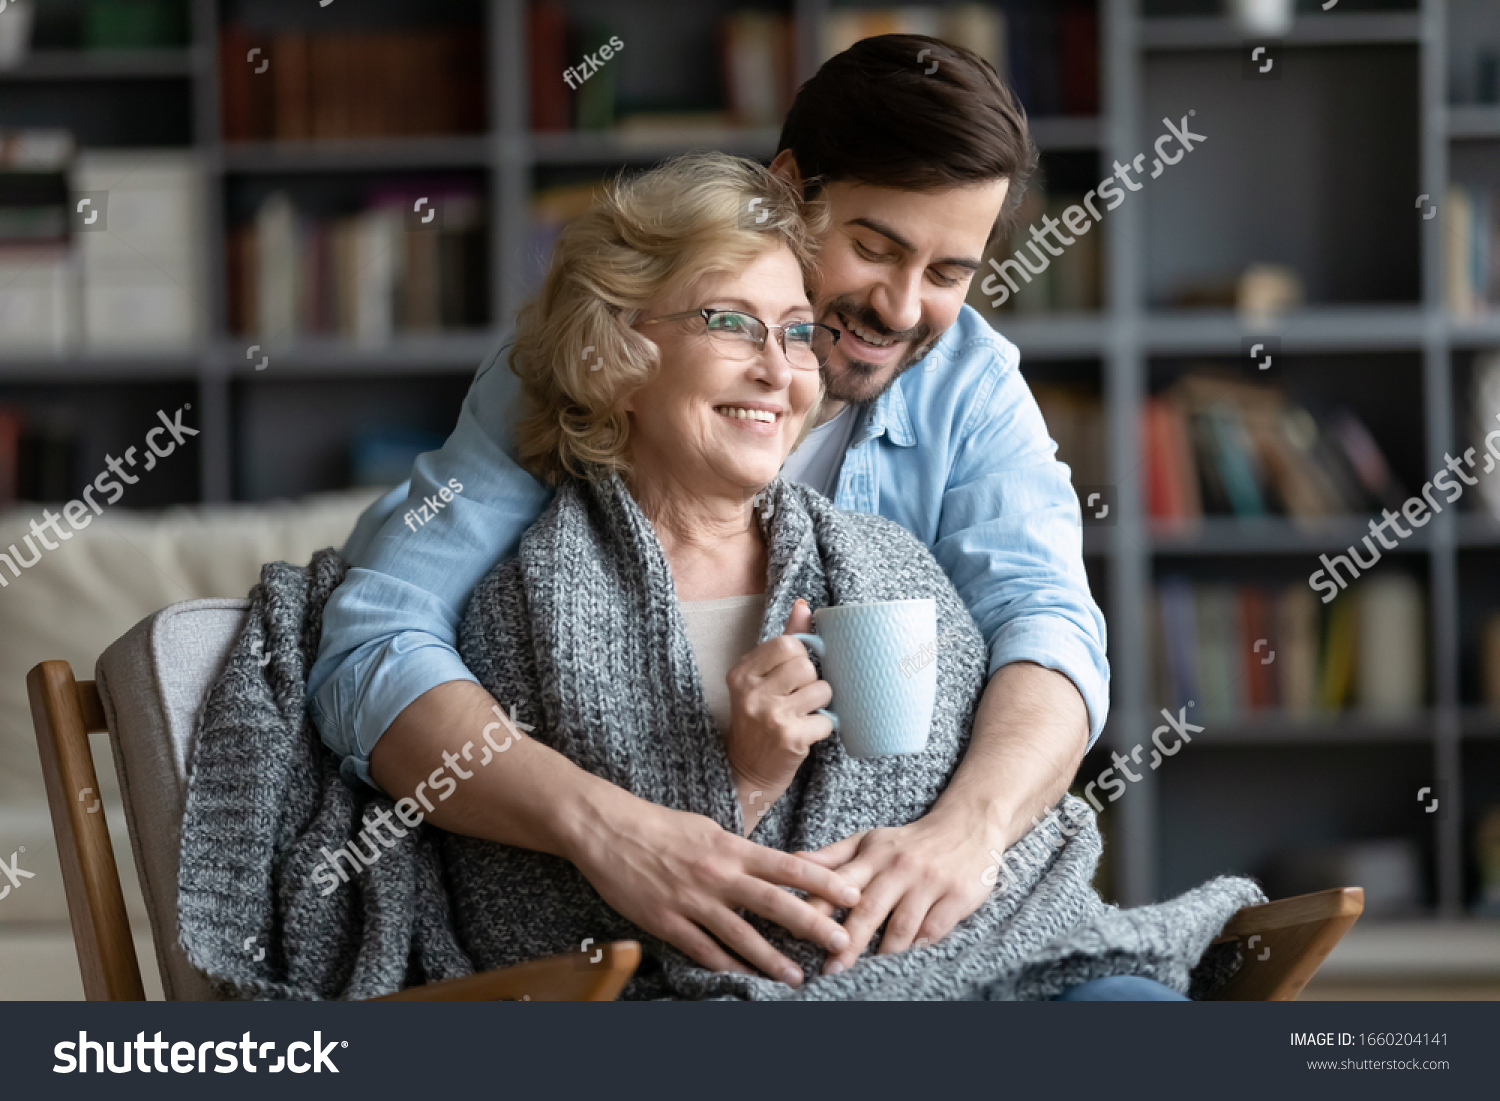 Loving young man take care of happy middle-aged mother sit in chair drinking tea enjoying family weekend in living room, thankful grown-up adult son hug show gratitude and affection to mature mom #1660204141